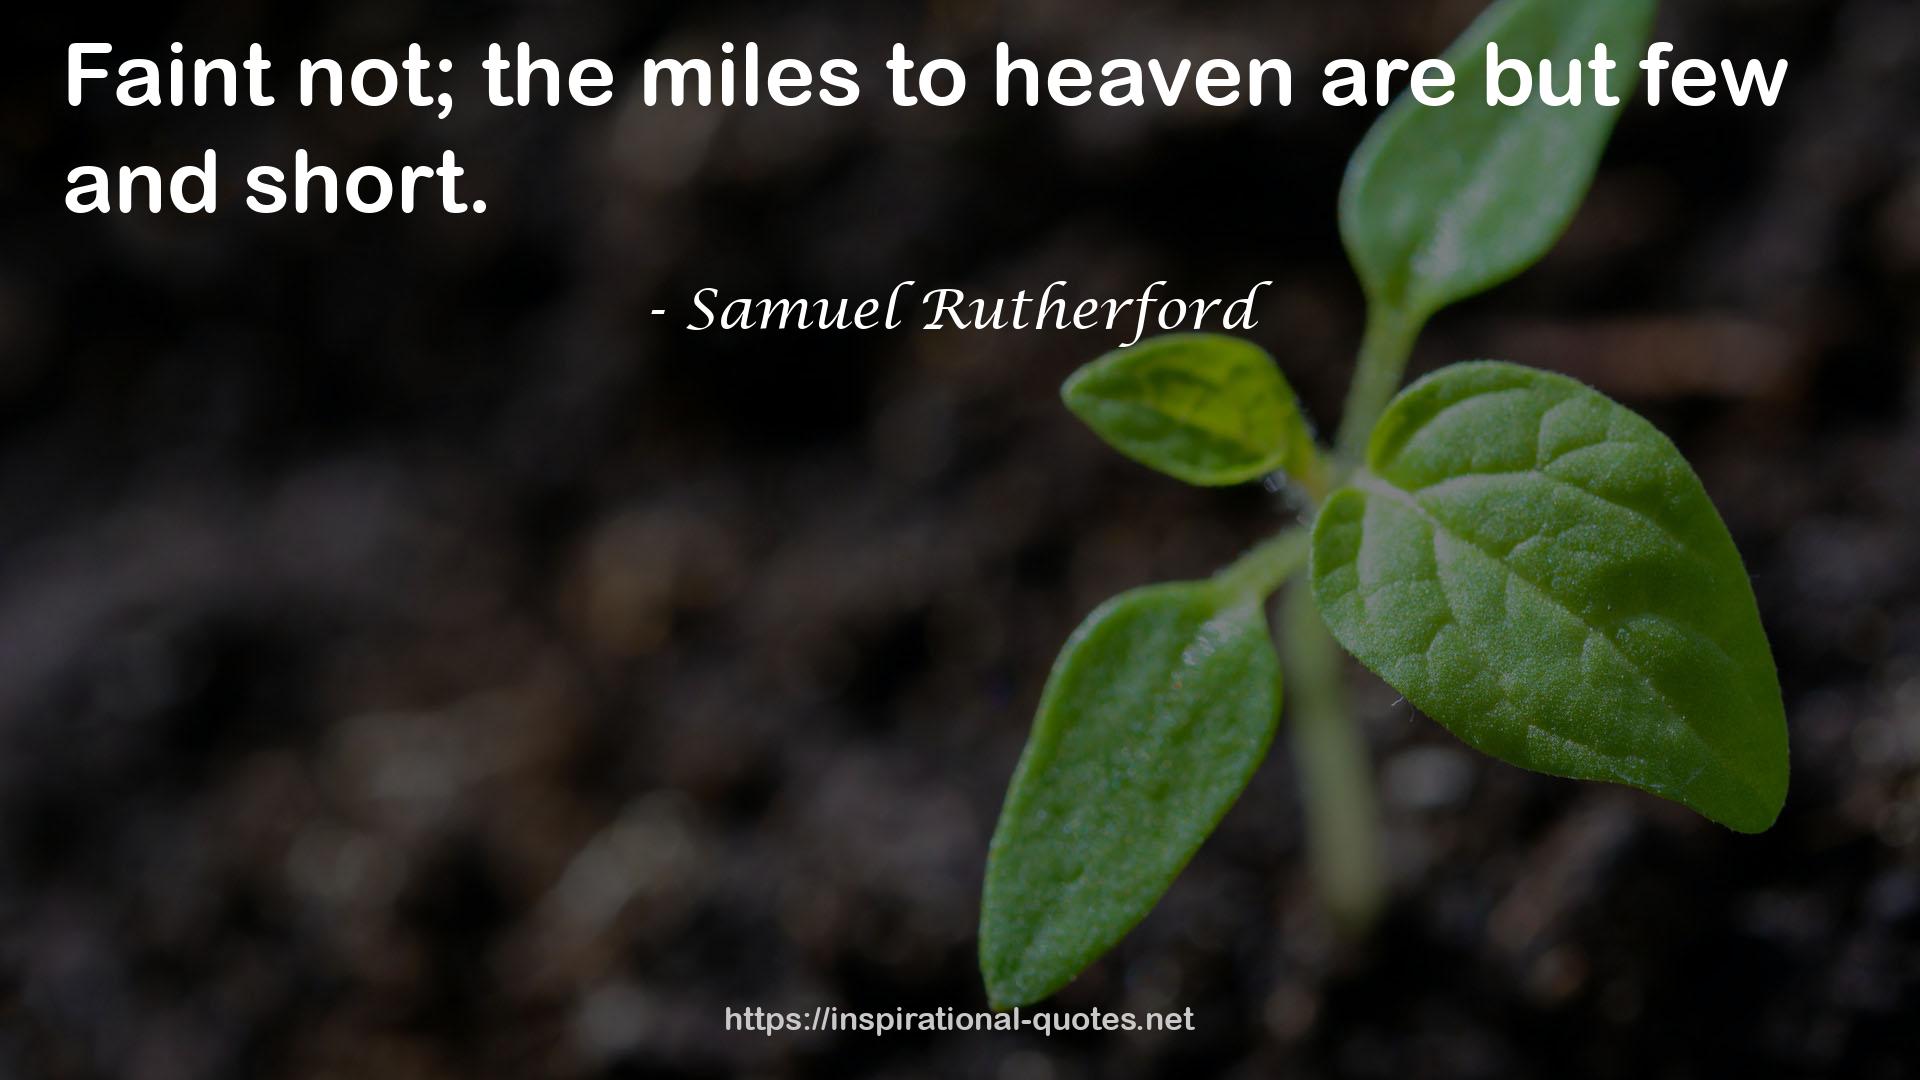 Samuel Rutherford QUOTES